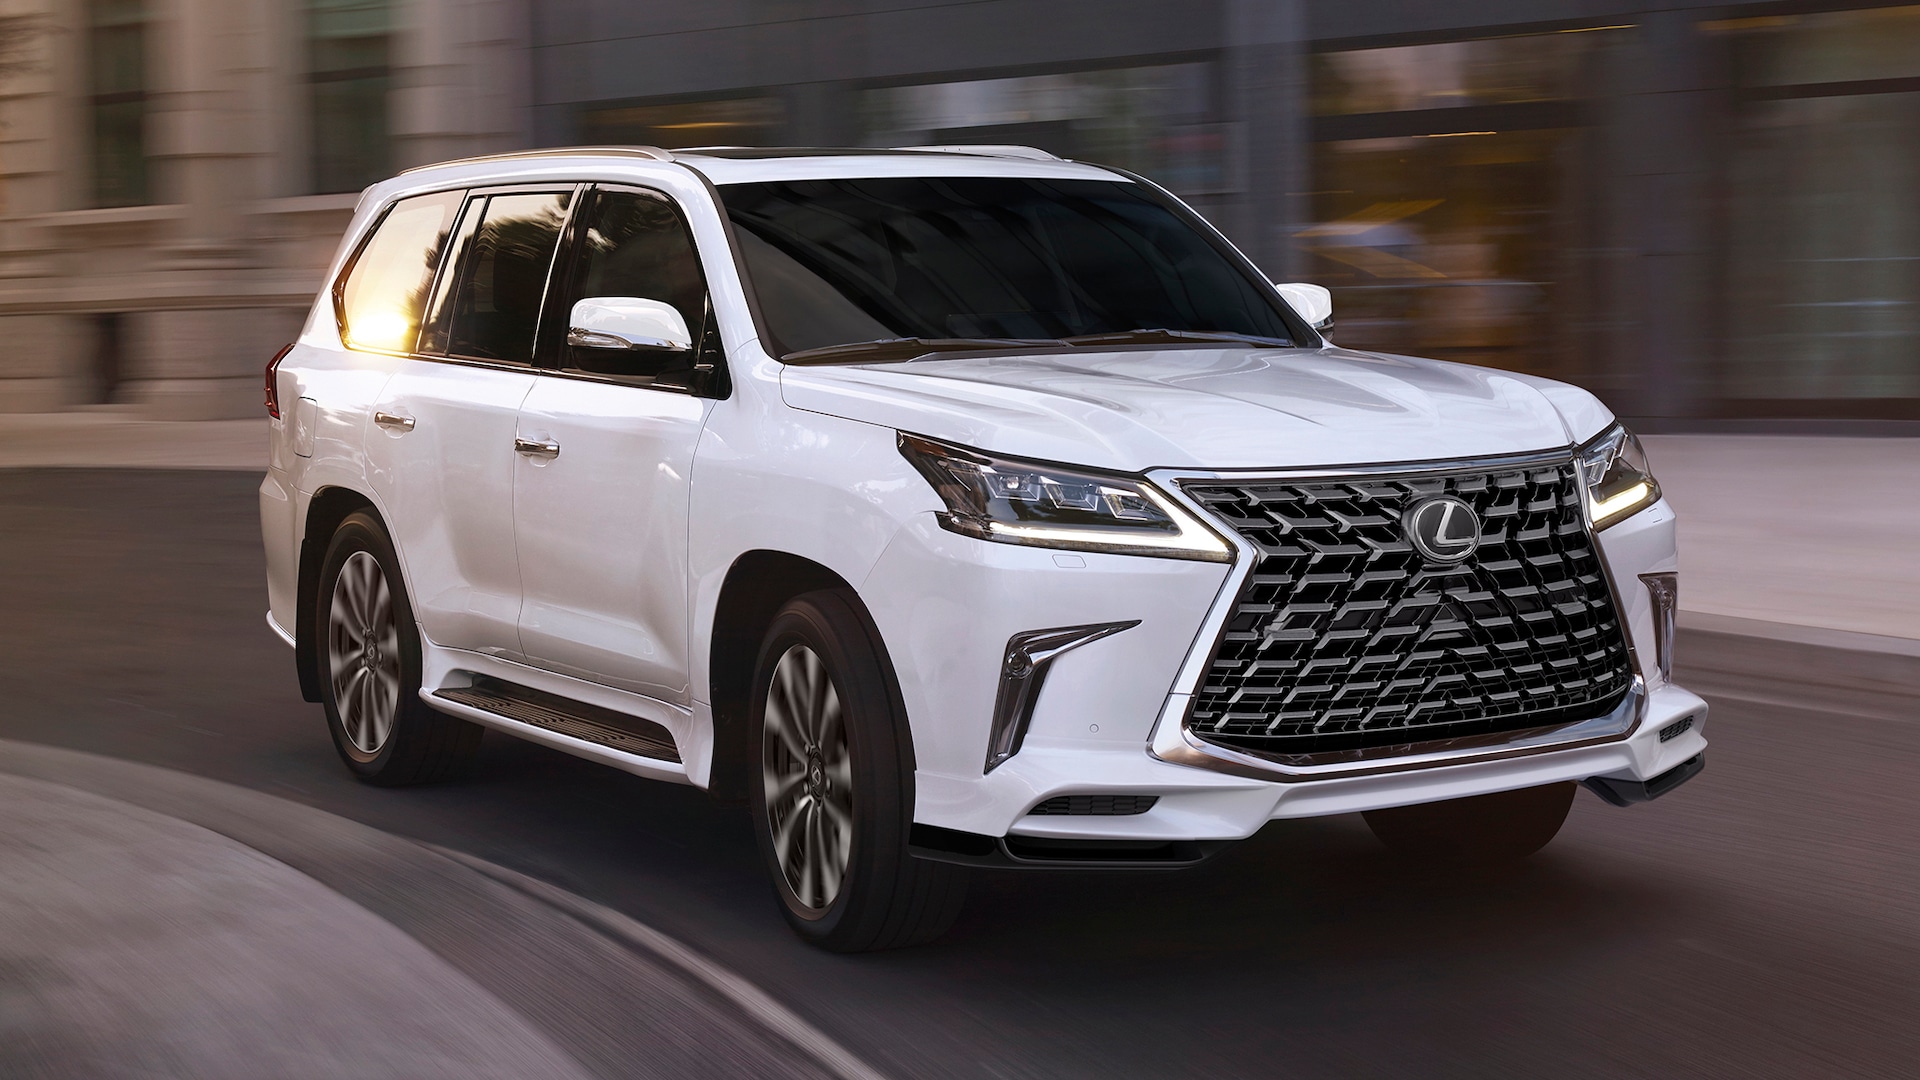 2021 Lexus LX Prices, Reviews, and Photos - MotorTrend